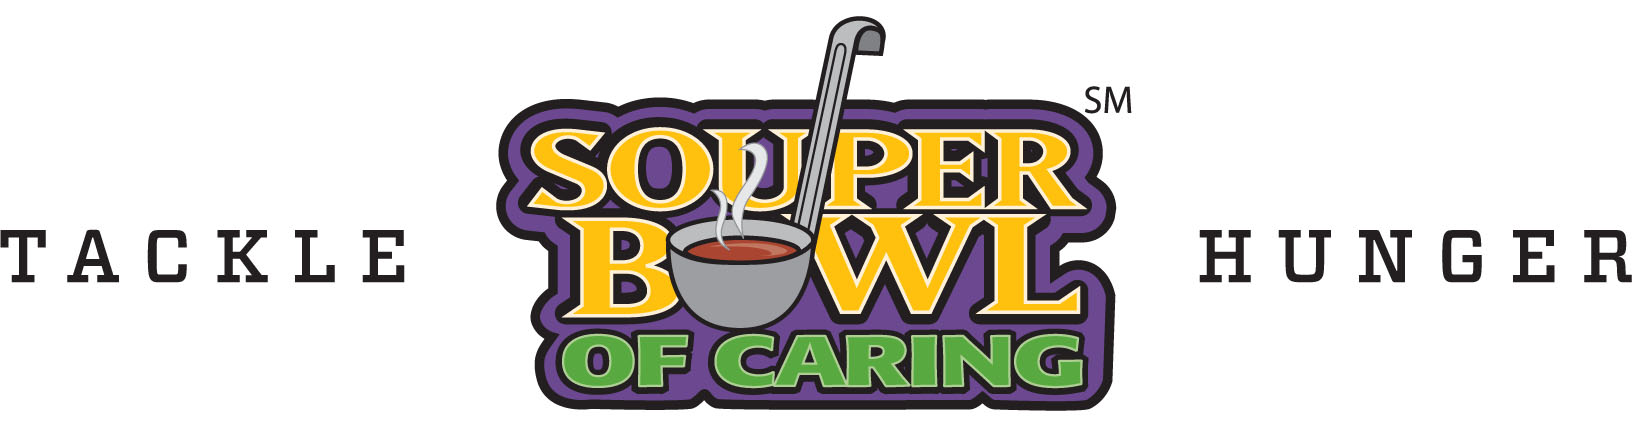 Souper Bowl of Caring 2018